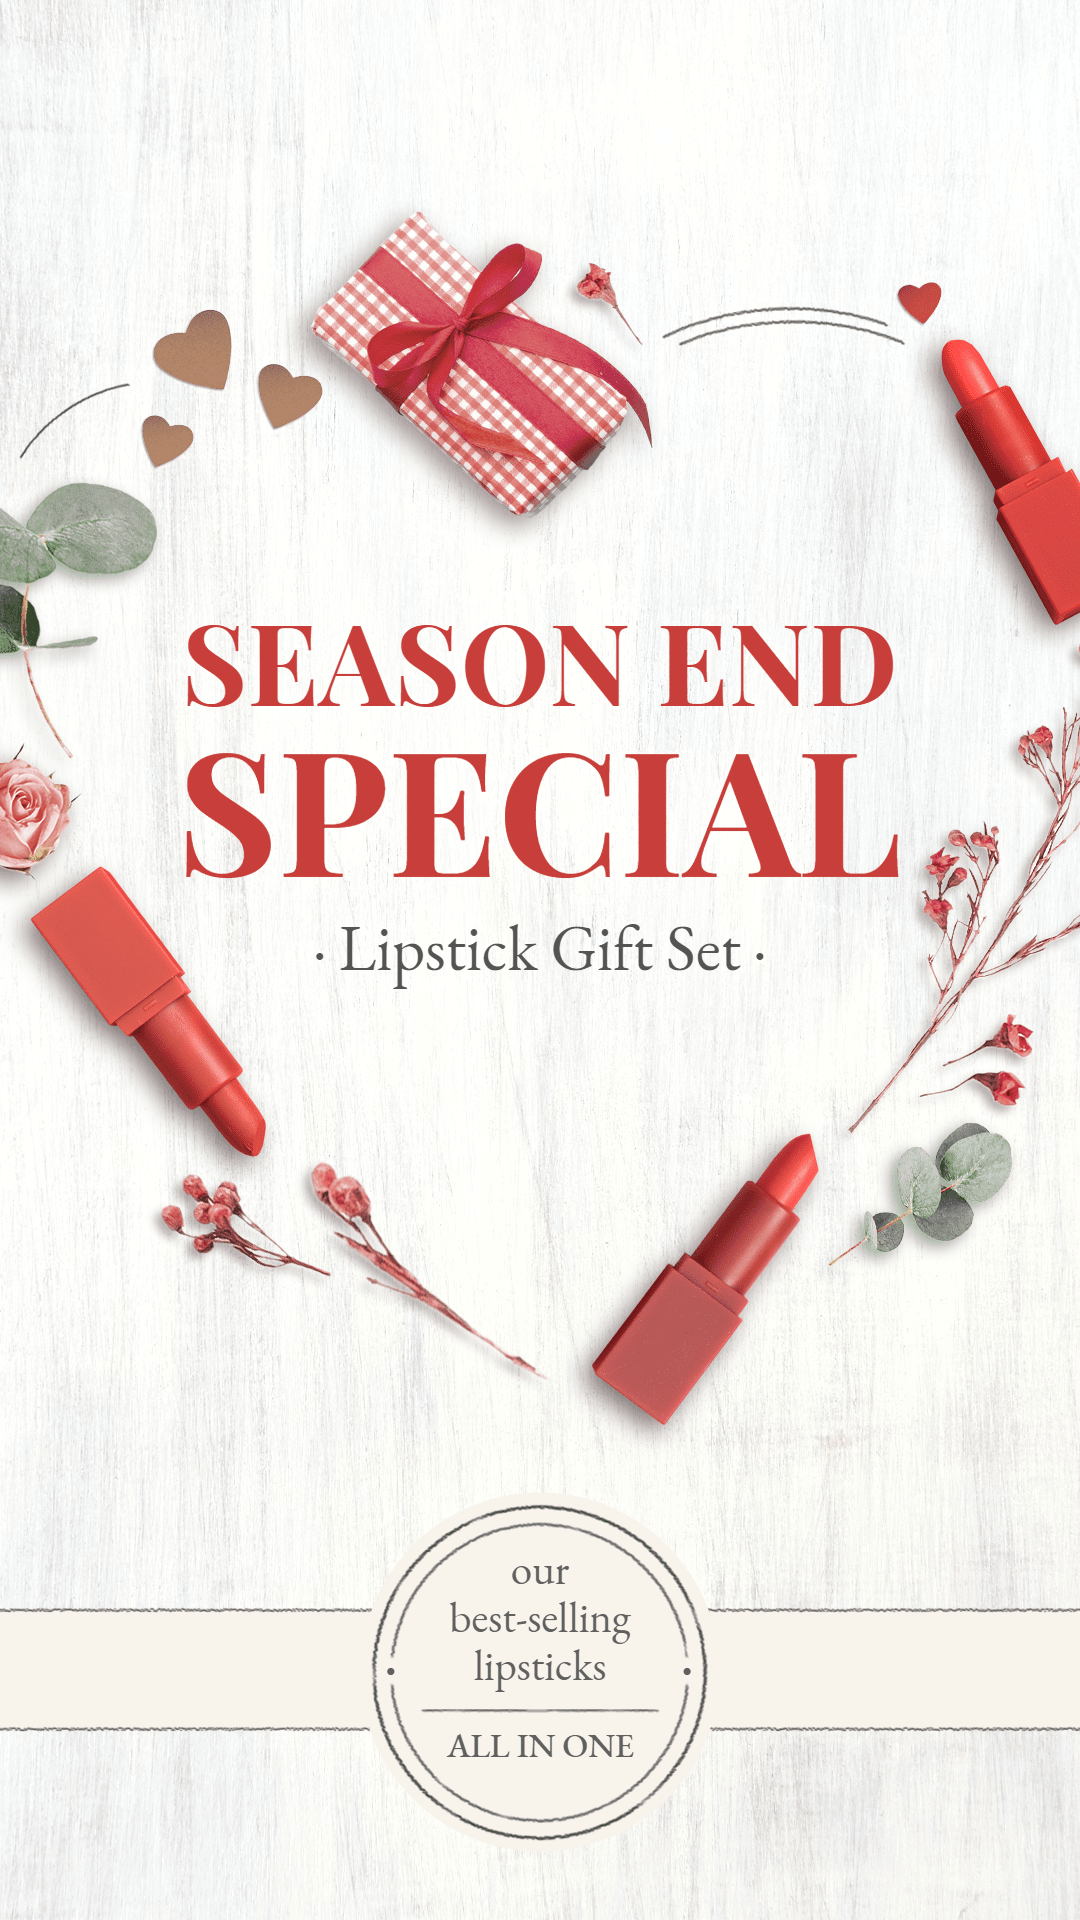 Luxurious Lipstick Gift Set Display Promotion Ecommerce Story预览效果